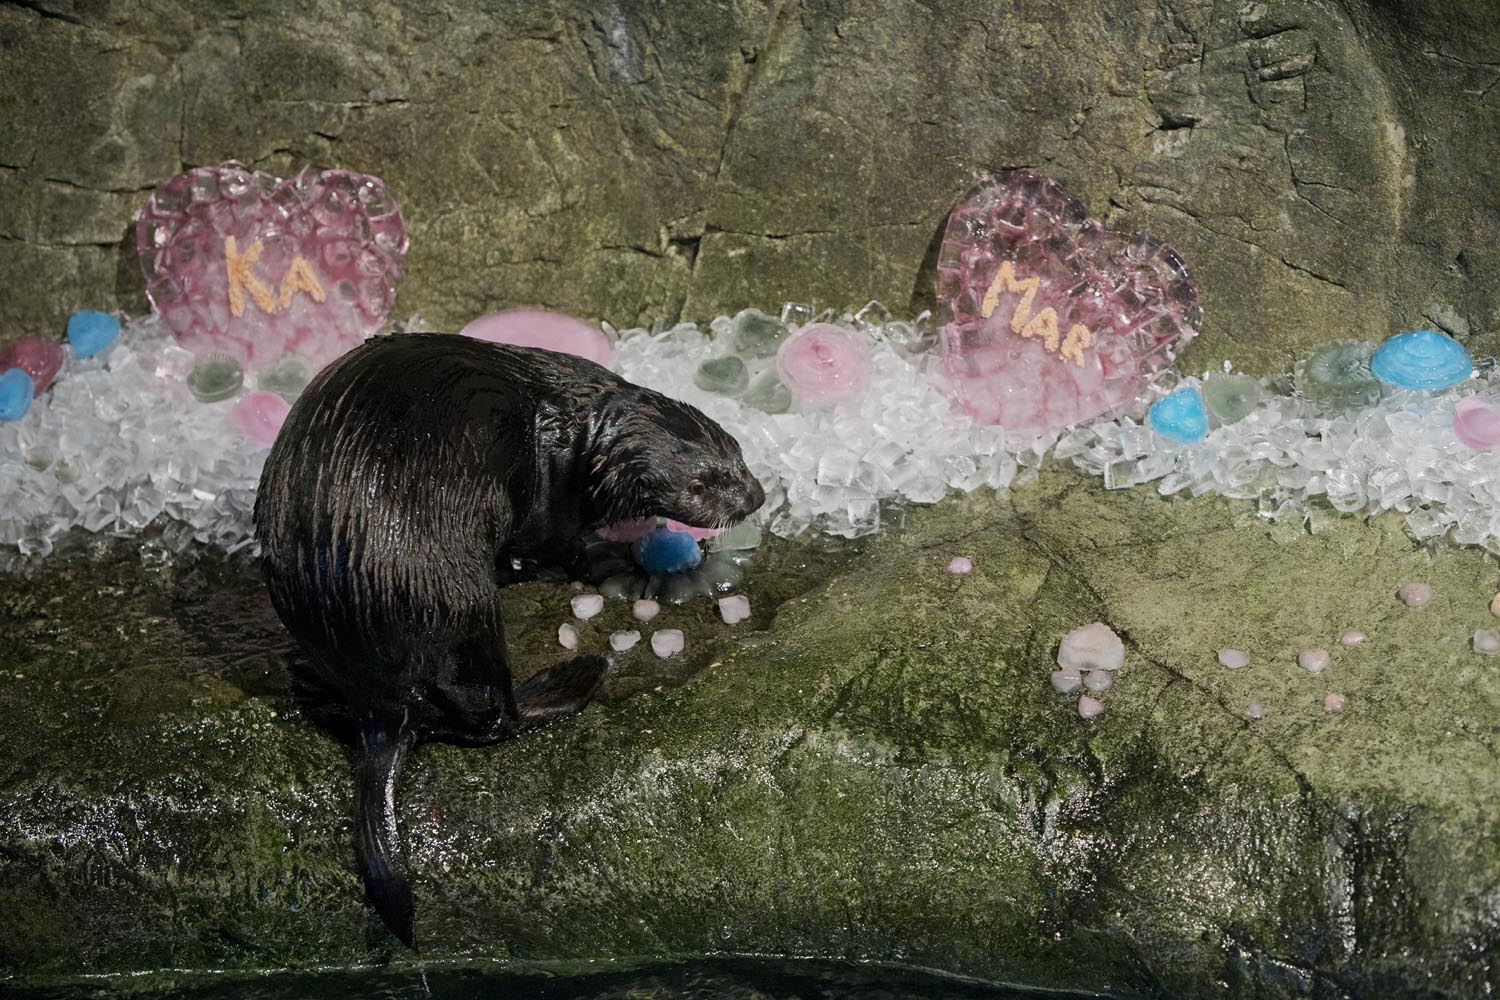 Shedd Aquarium's Otters Celebrate Valentine's Day with Icy Treats and More 2